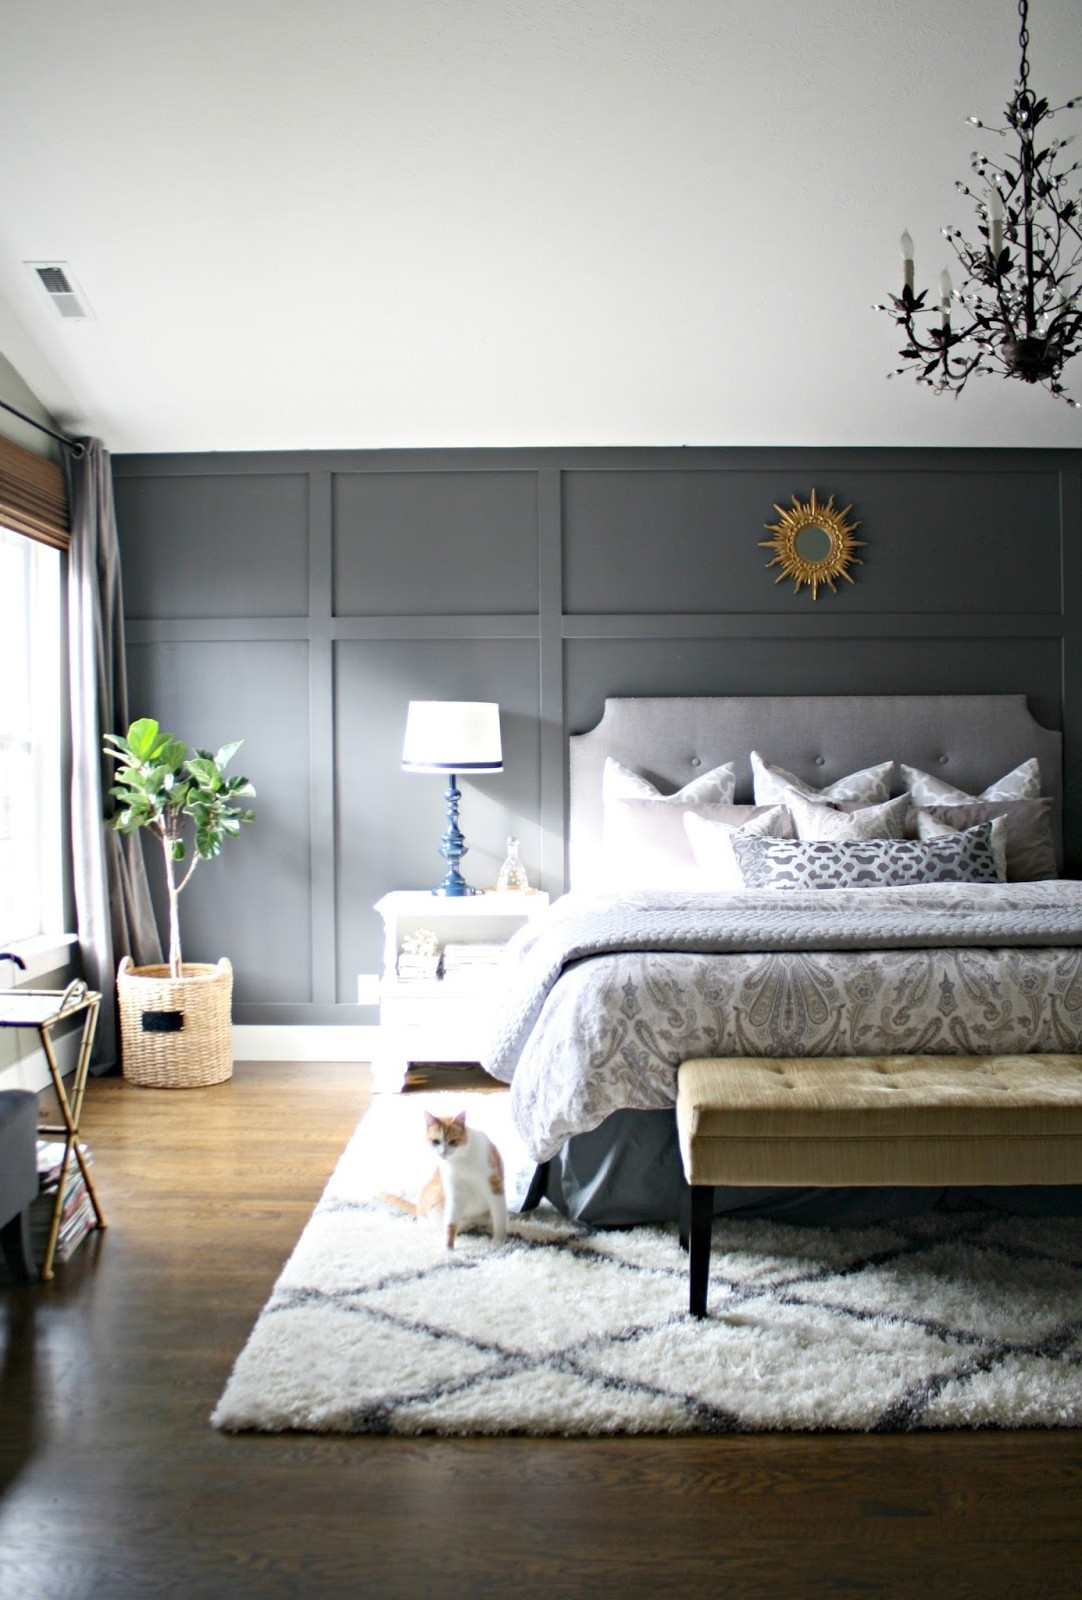 Master Bedroom Accent Wall
 15 Best Collection of Gray Wall Accents